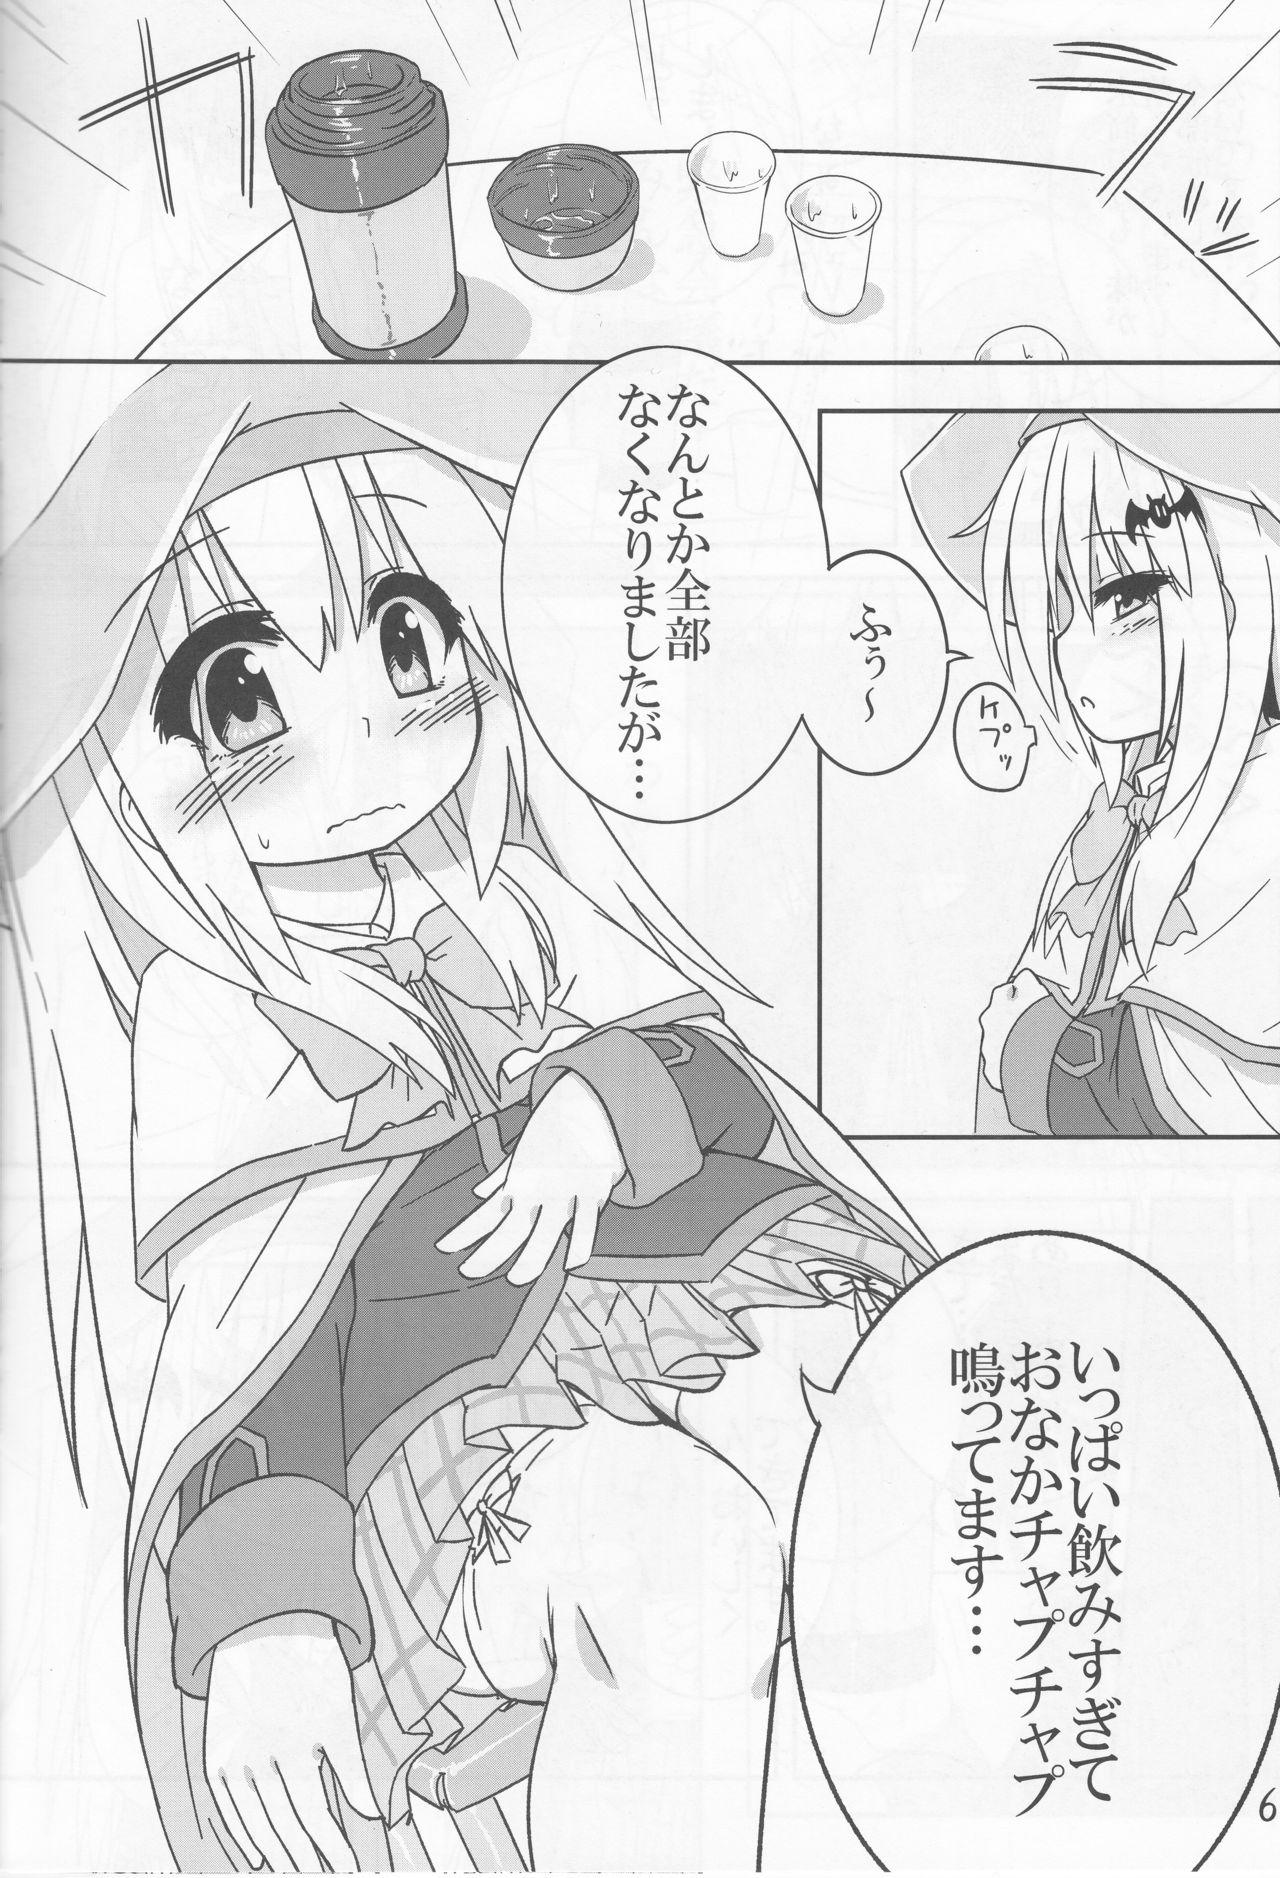 Indo Kudo no Shikkin Hon - Little busters Amature Sex Tapes - Page 7